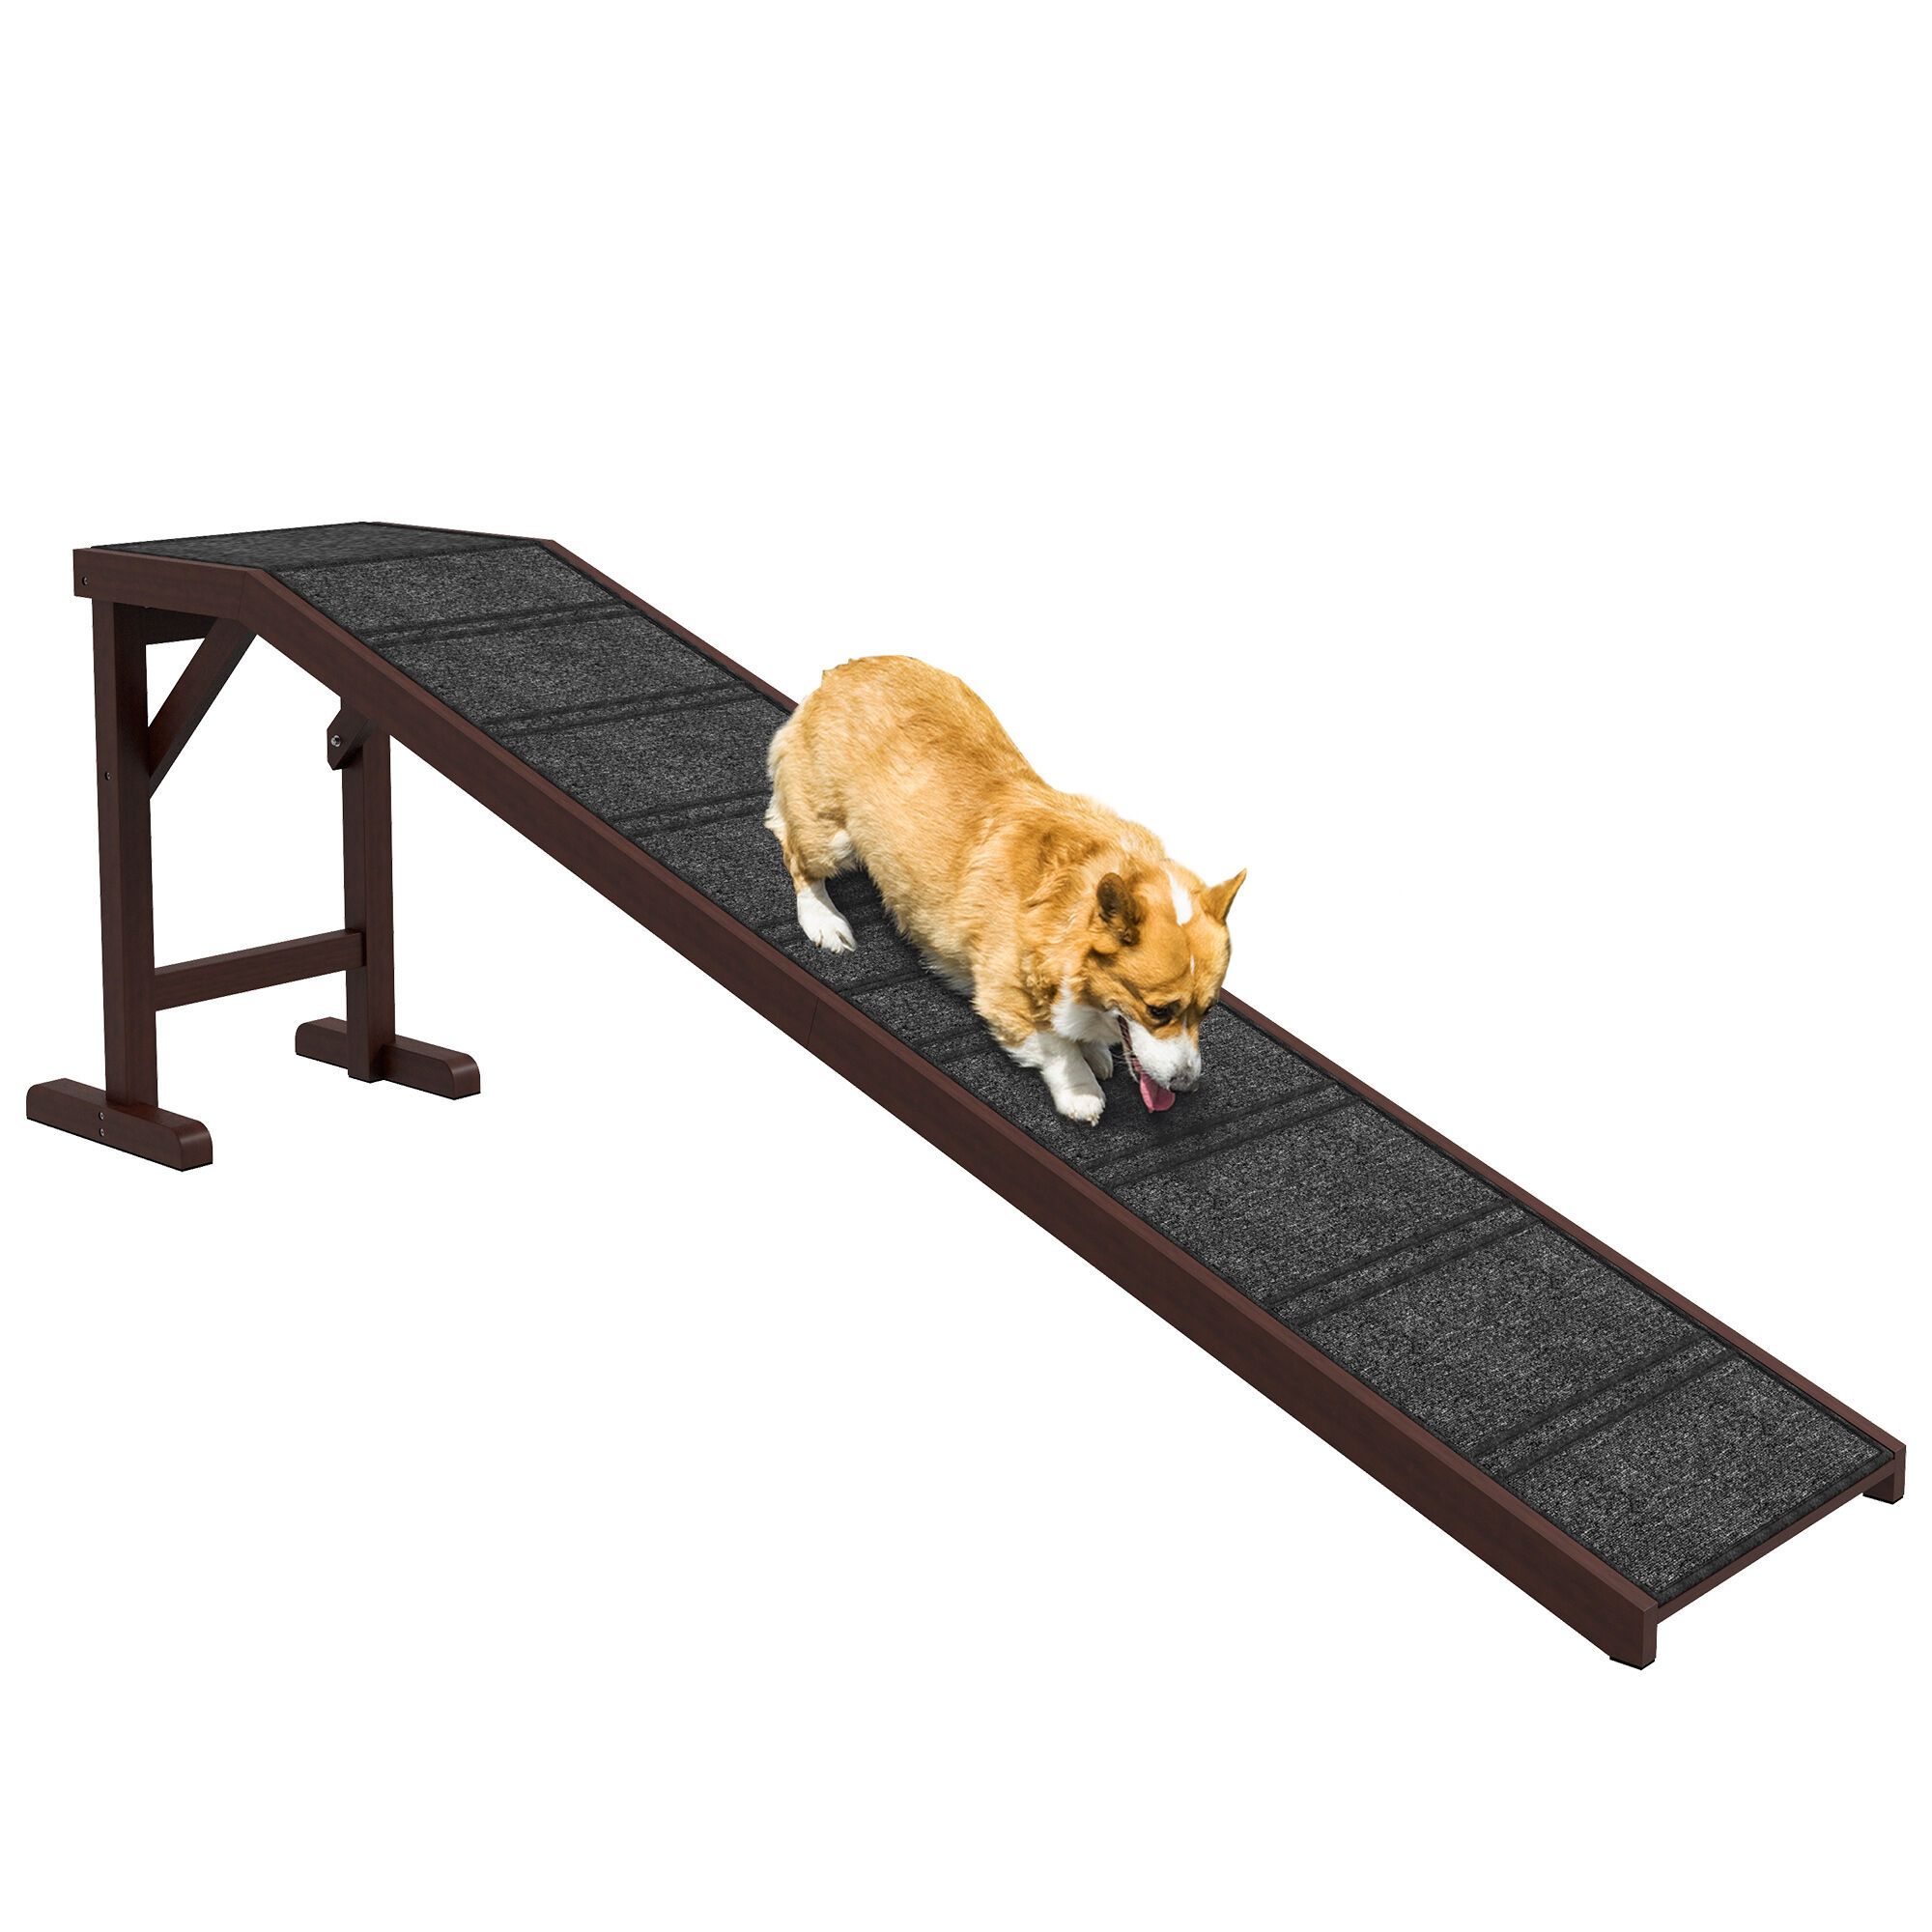 PawHut Dog Ramp for Bed, Pet Ramp for Dogs with Non-slip Carpet & Top Platform, Pine Wood, 74"L x 16"W x 25"H, Brown